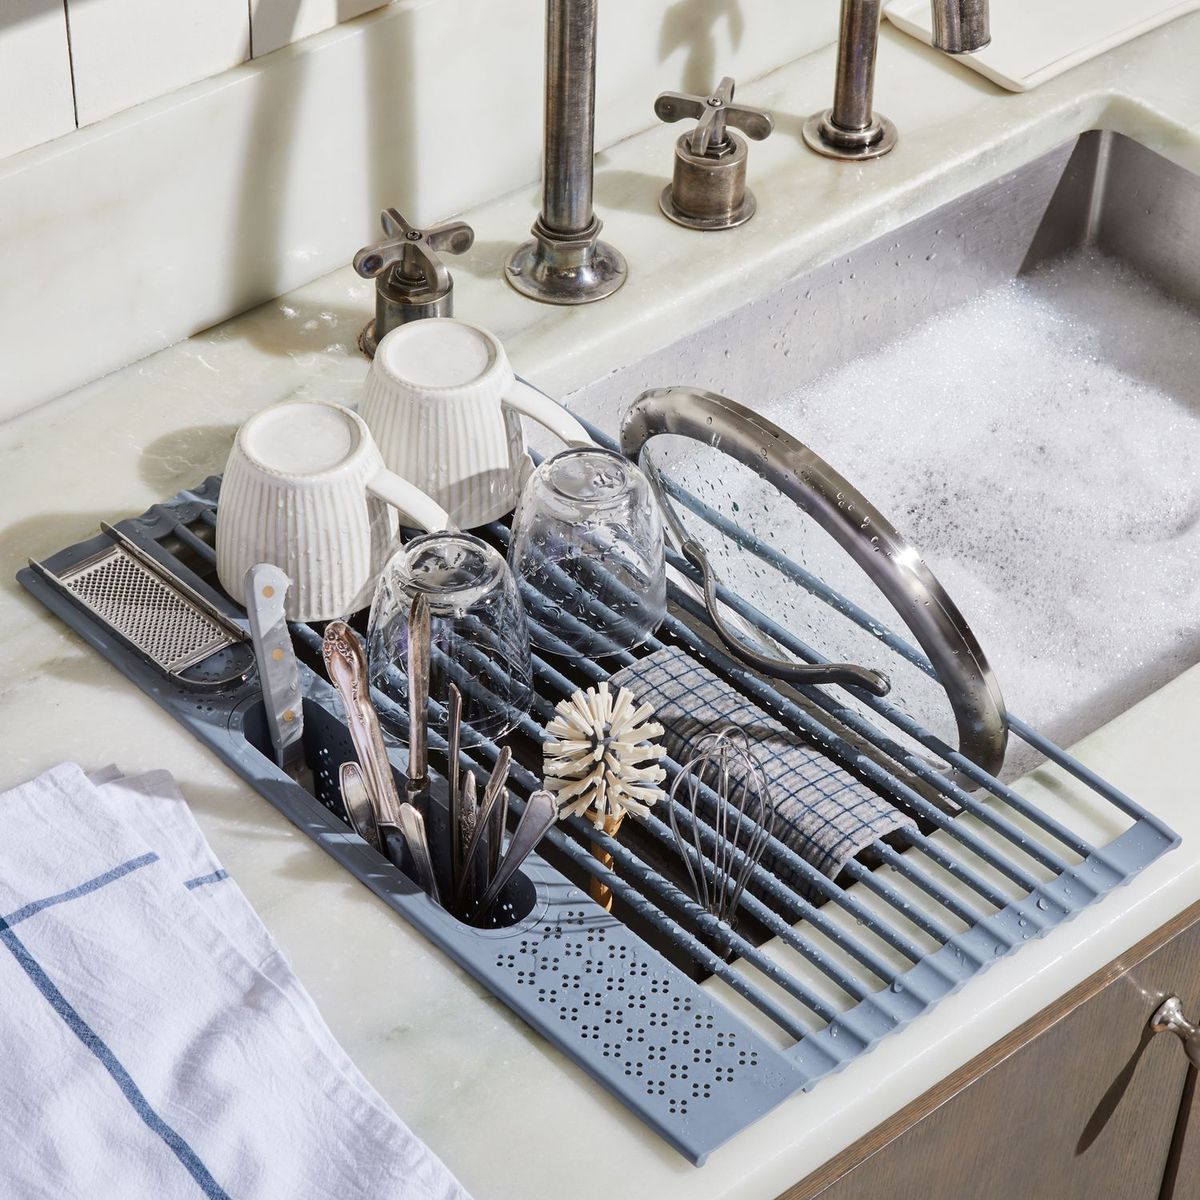 Shop Dish Drying Rack Over Sink Small online